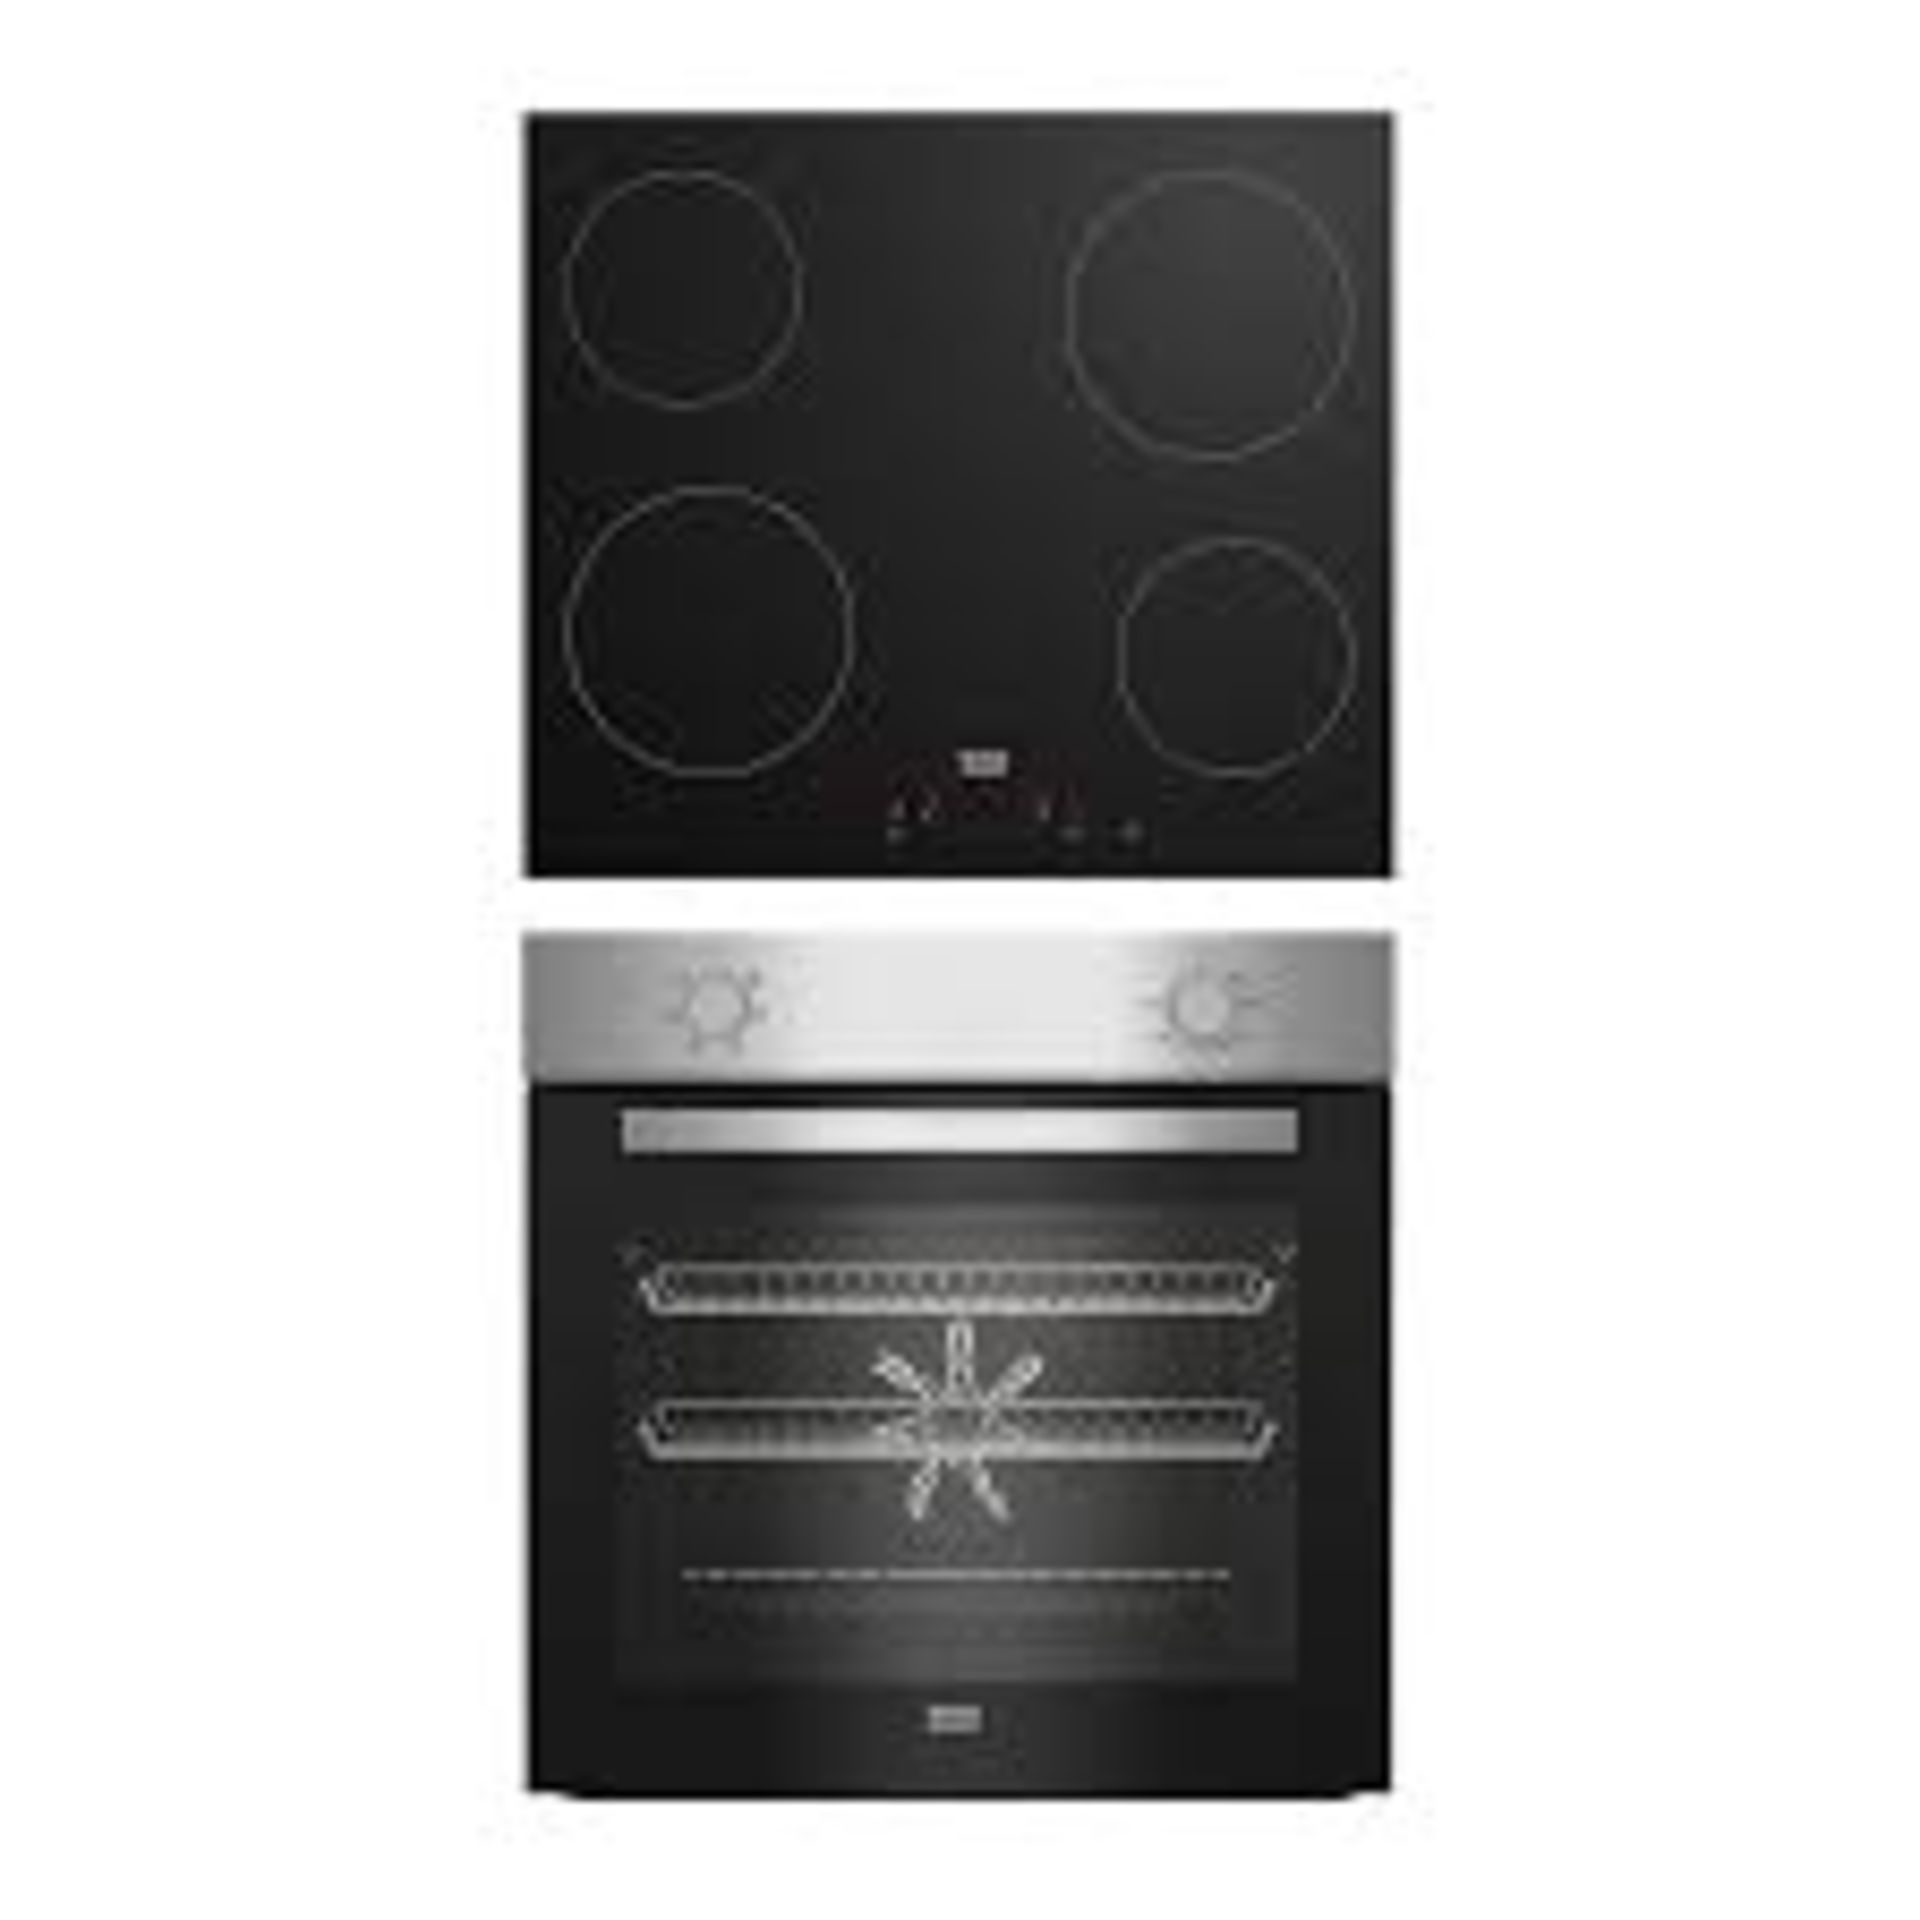 Cooke & Lewis CLMFBLa Built-in Single Multifunction Oven - Black. -ER47. This multifunctional oven